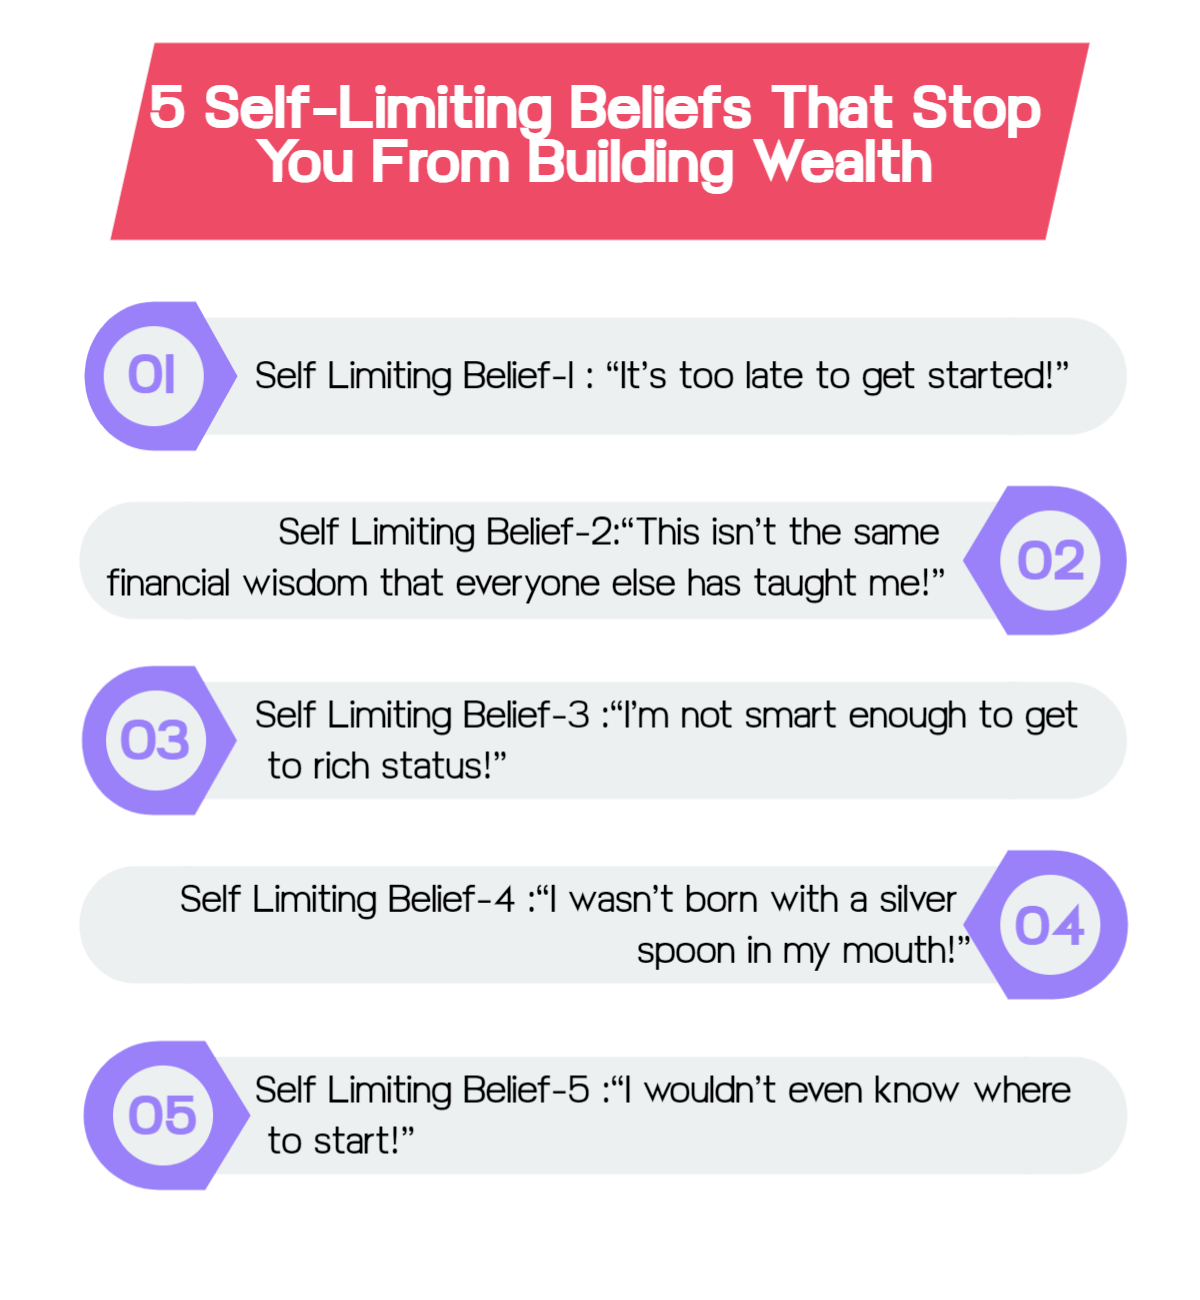 5 Self-Limiting Beliefs That Stop You From Building Wealth